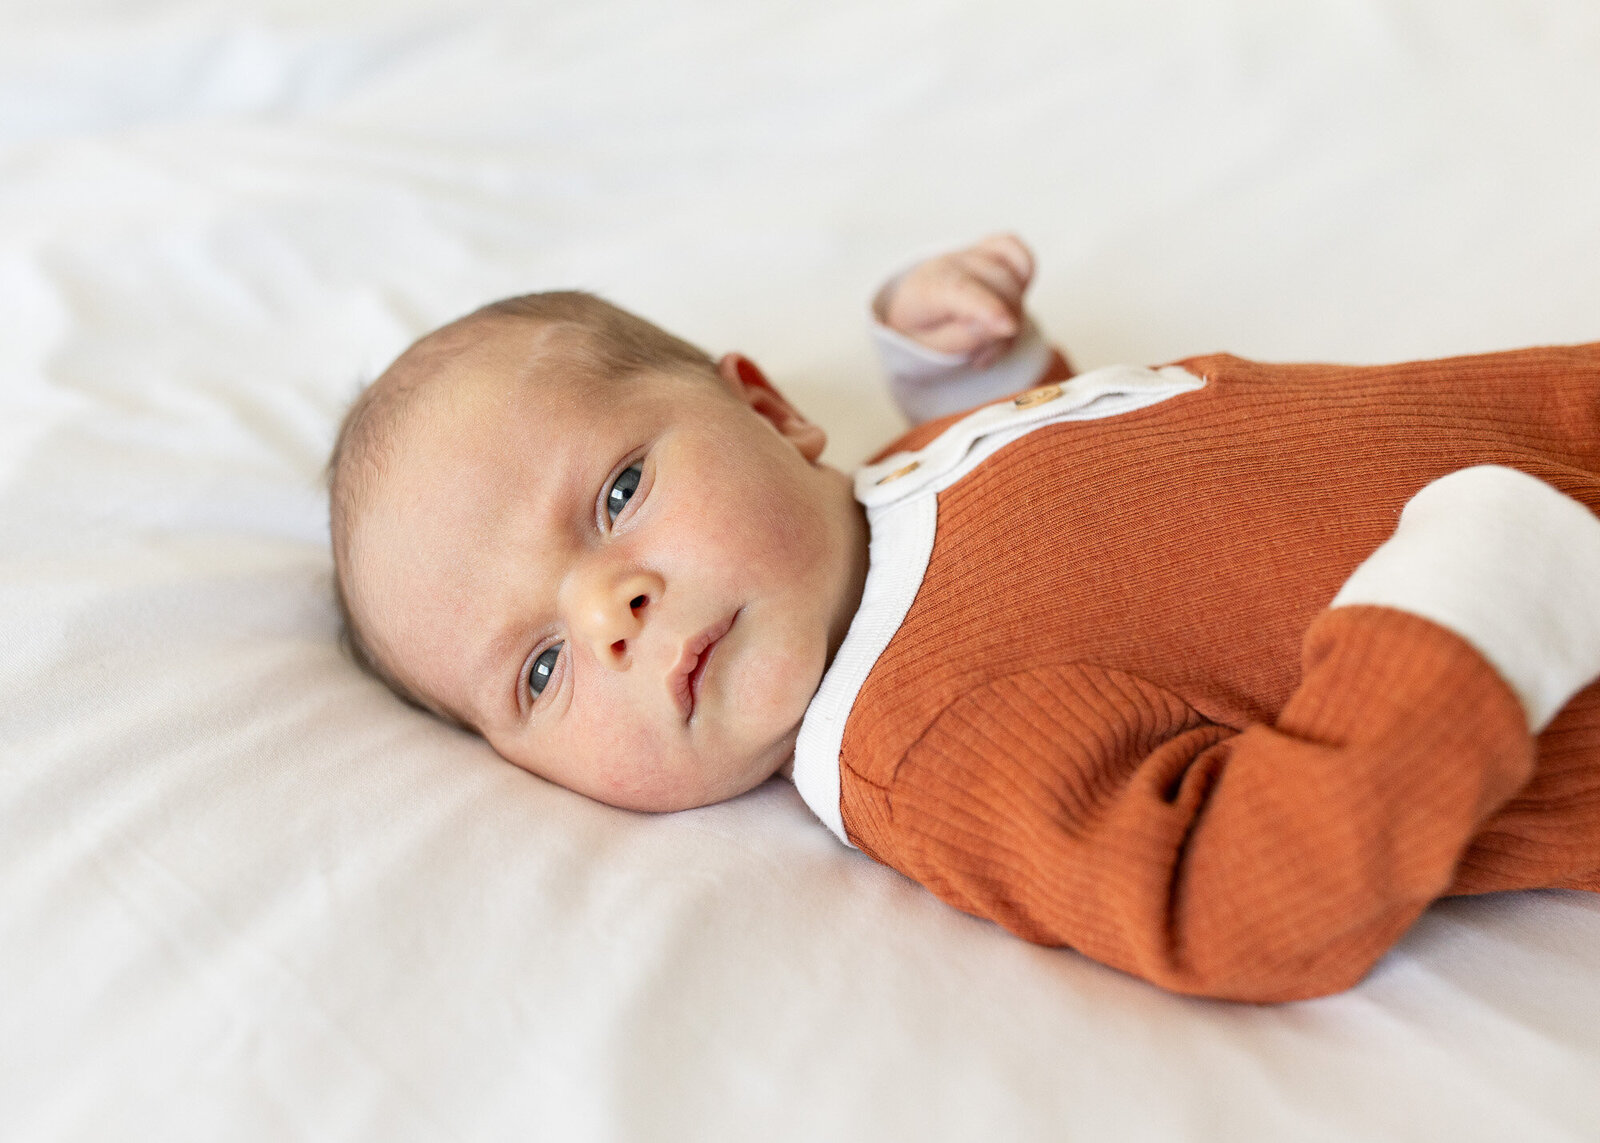 Infant in mustard colored jumper laying on bed.